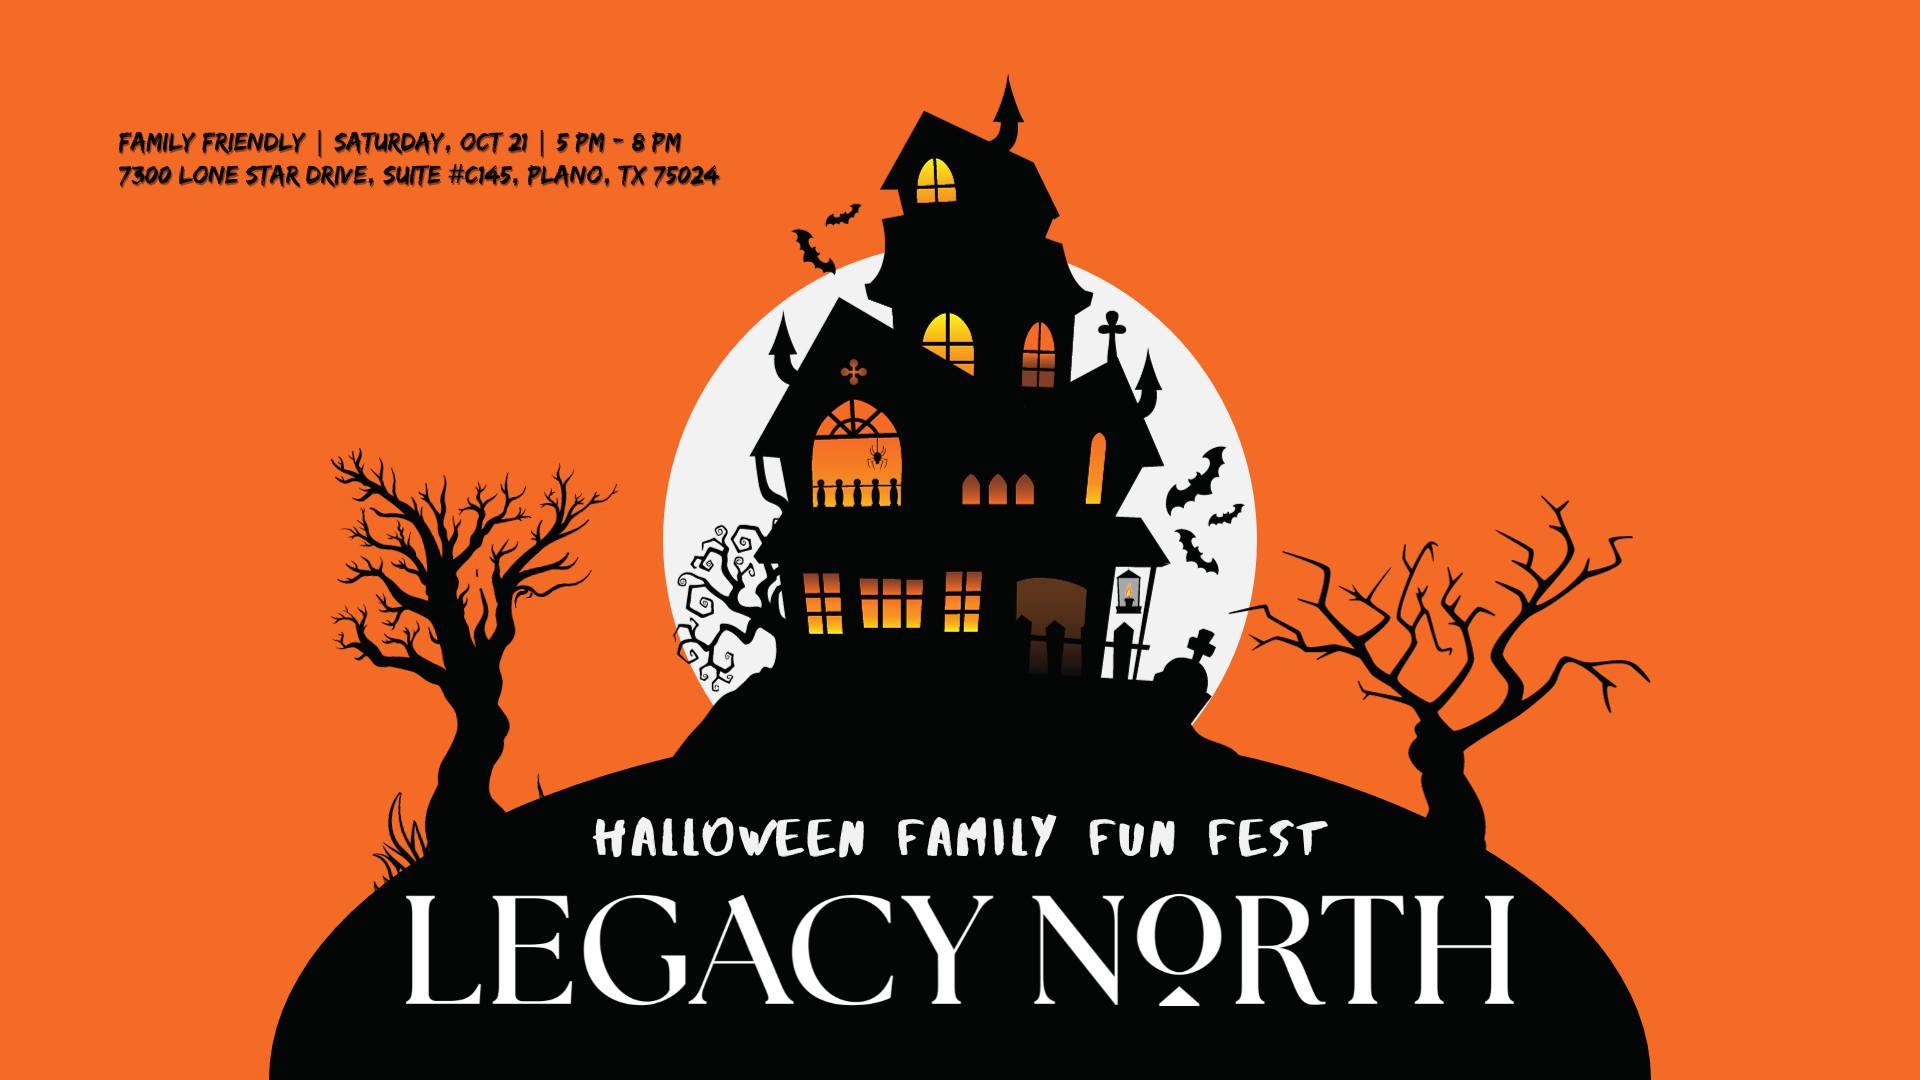 Halloween Family Fun Fest at Legacy North